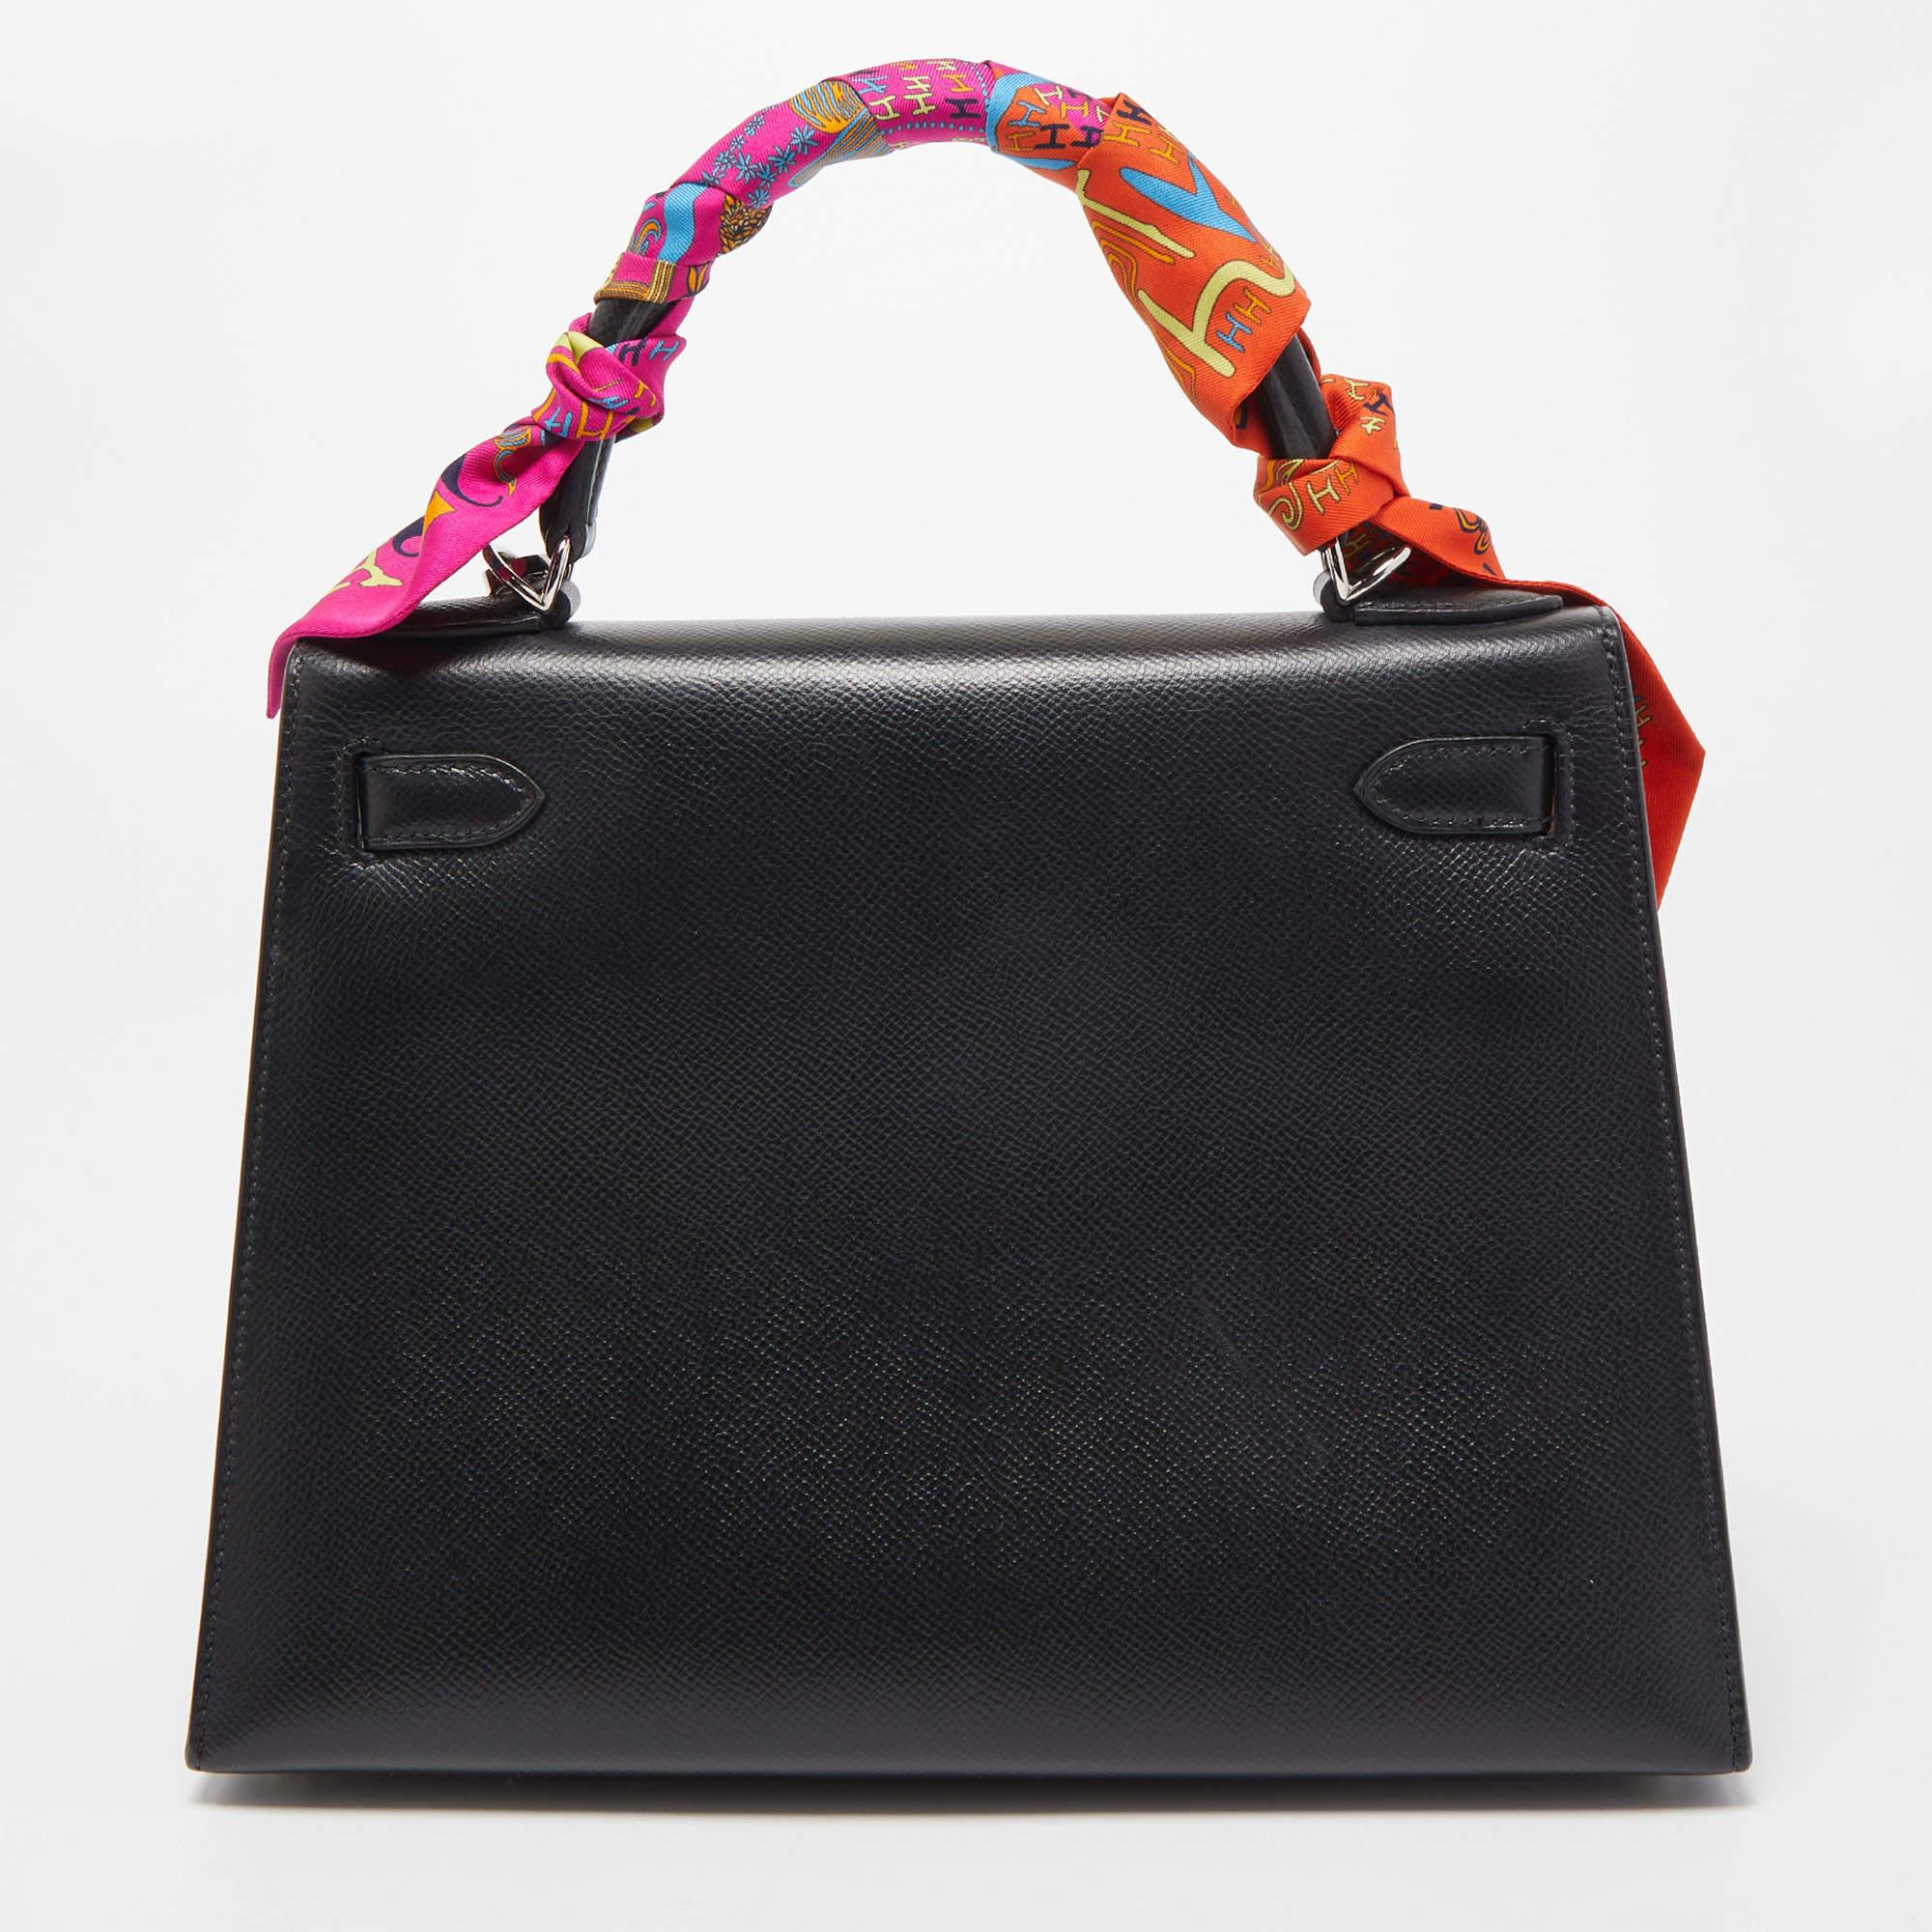 When it comes to beautiful bags, there are hardly any that can come close to the Hermès Kelly. It is a creation filled with beauty, utility, and value. We have here the Kelly Black Sellier 28 in palladium-finished hardware. Carefully hand-stitched